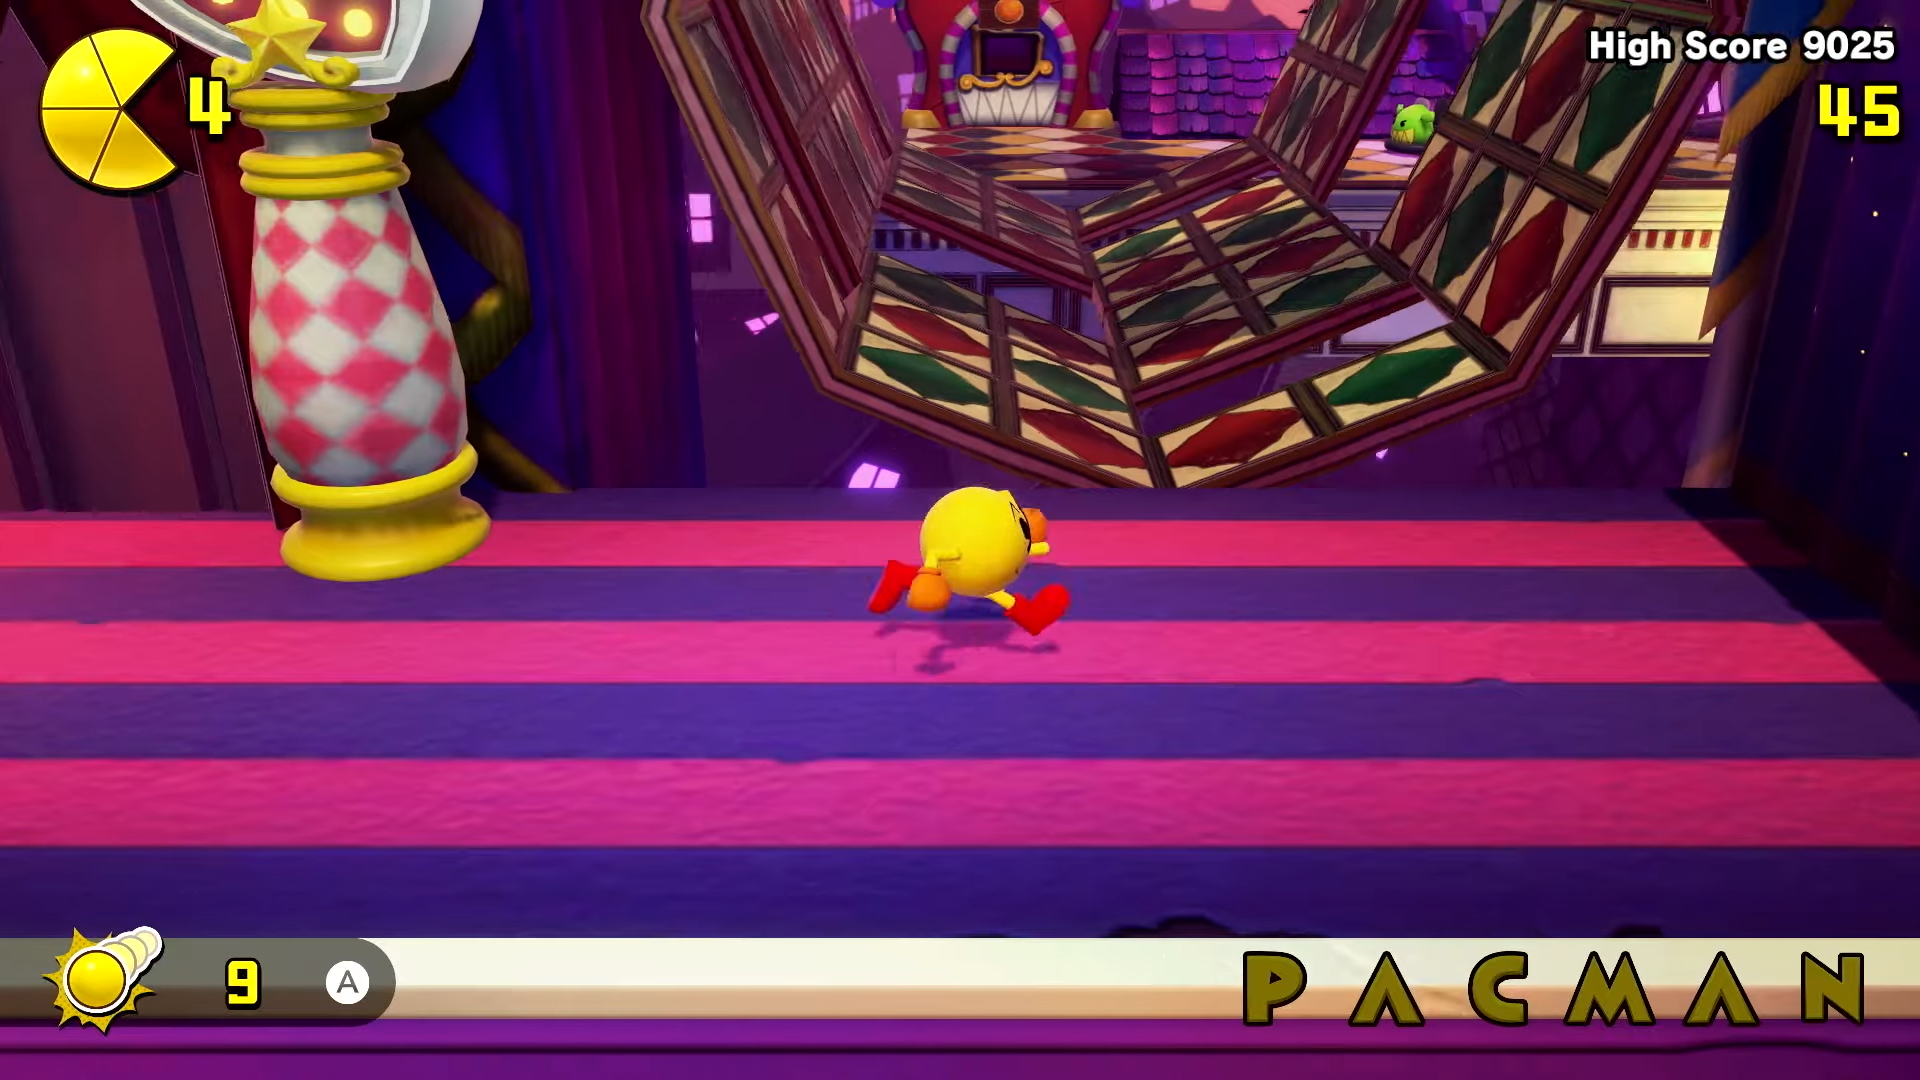 PAC-MAN WORLD Re-PAC Revealed